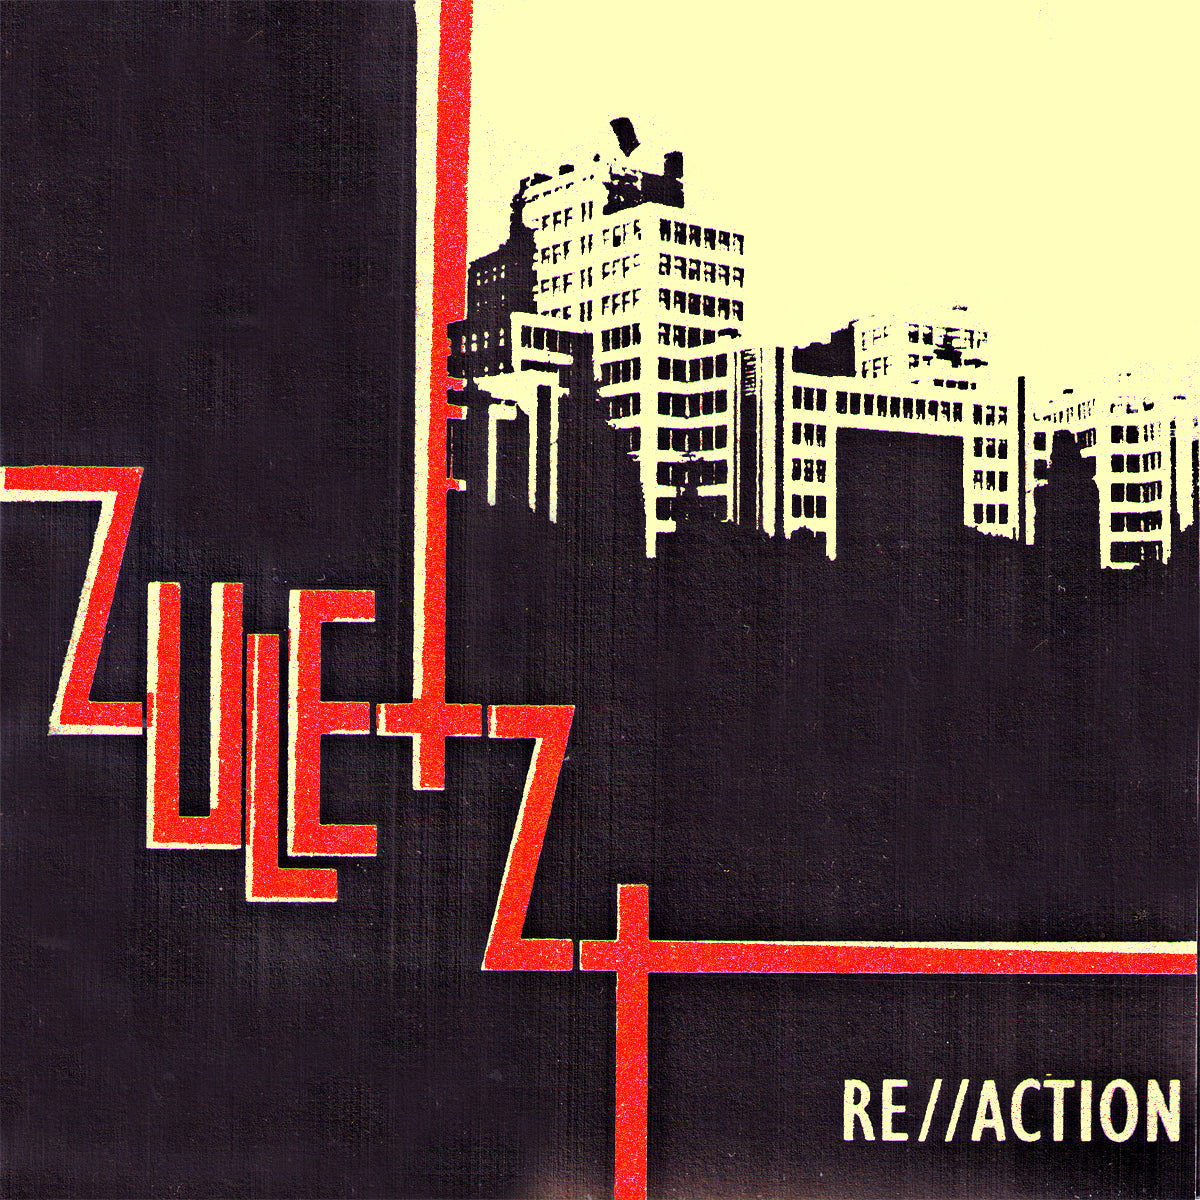 Zuletzt- Re//Action 7" ~RARE RED BAND NAME CVR LIMITED TO 50 / EX MISCLACULATIONS!